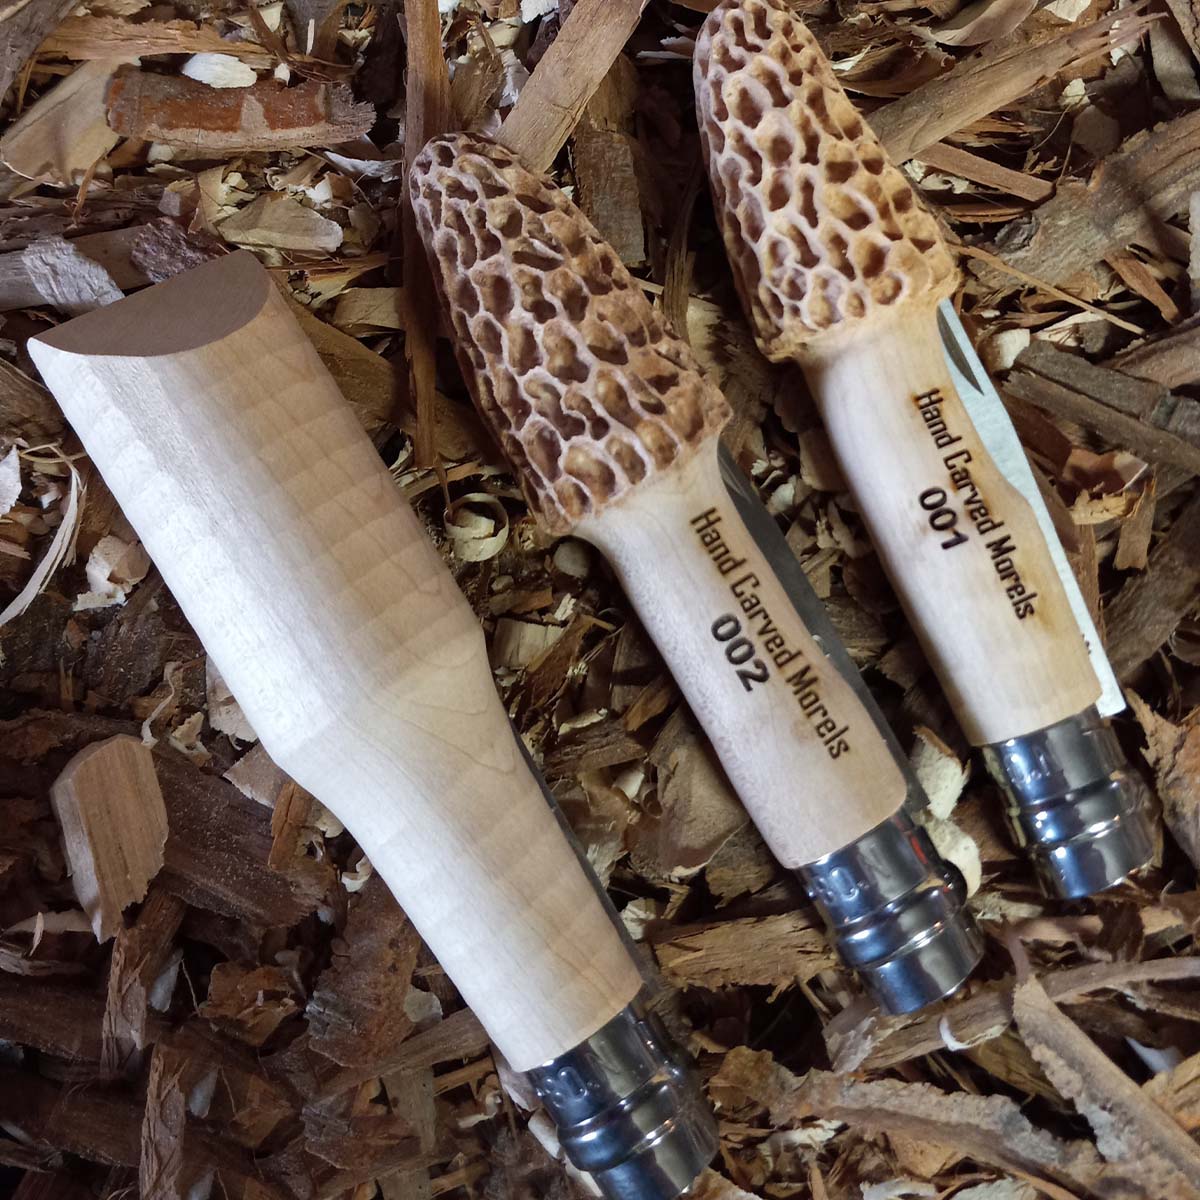 High End Whittling Knife Comparison - Best Whittling and Wood Carving Knife  Review